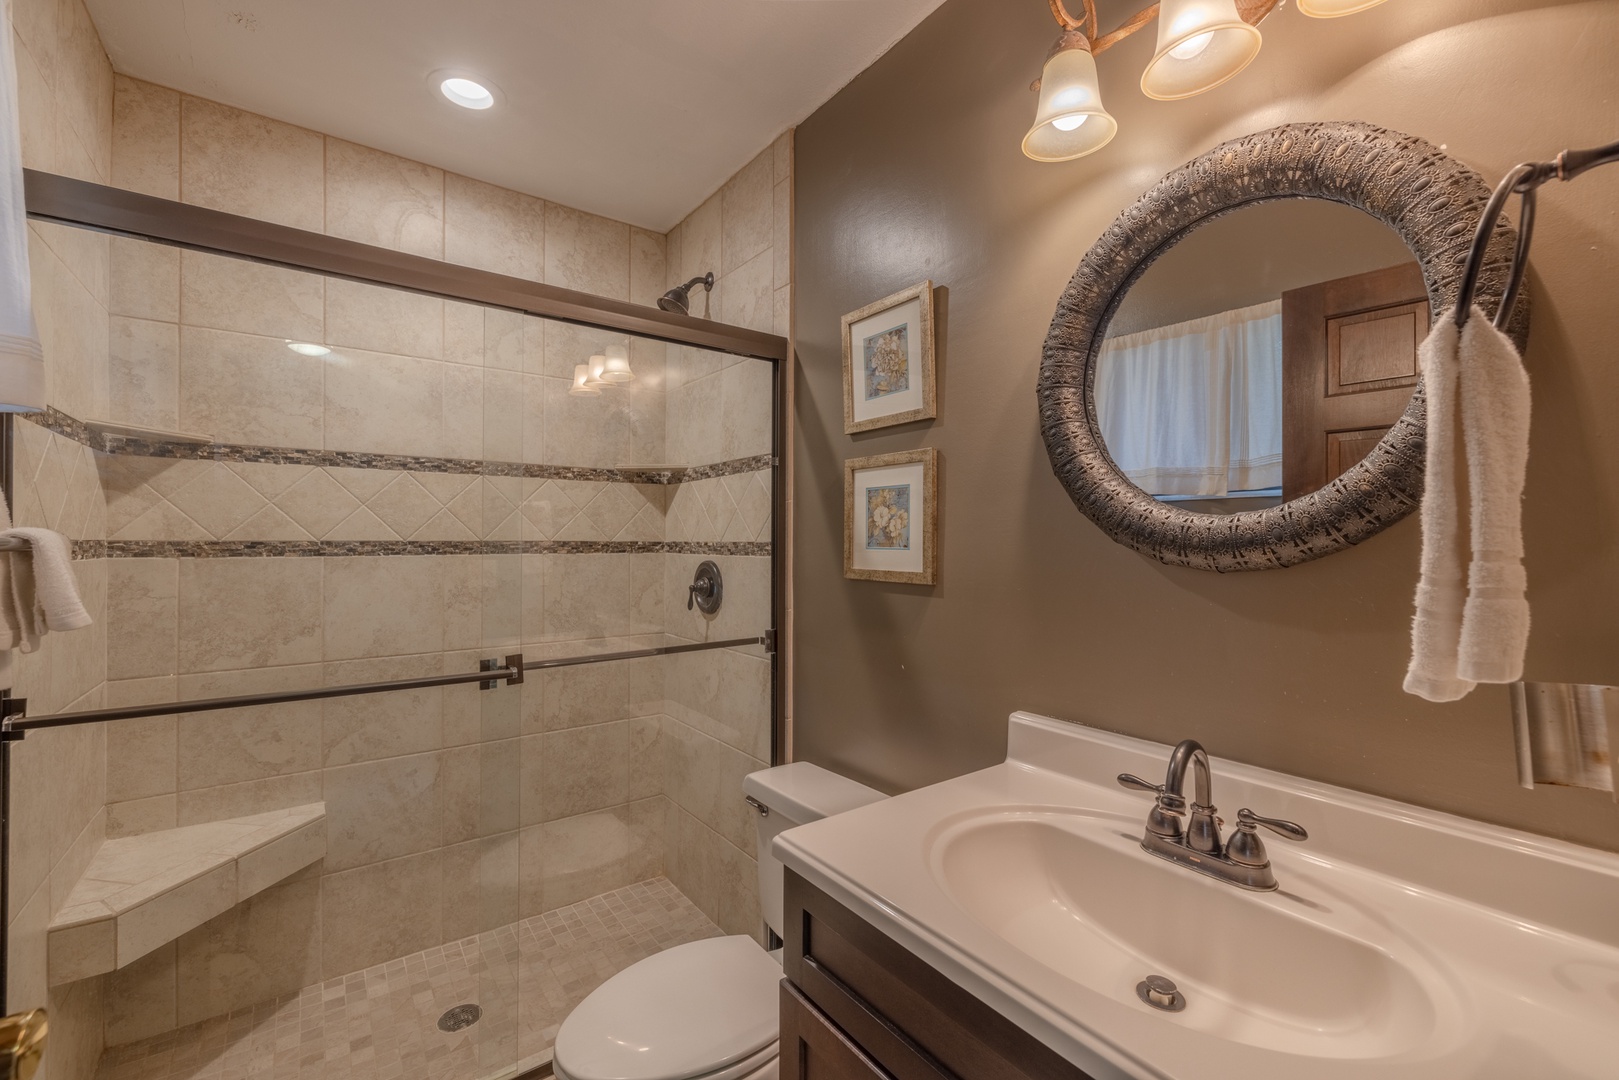 Recently remodeled full bathroom on the main level with spacious walk-in shower